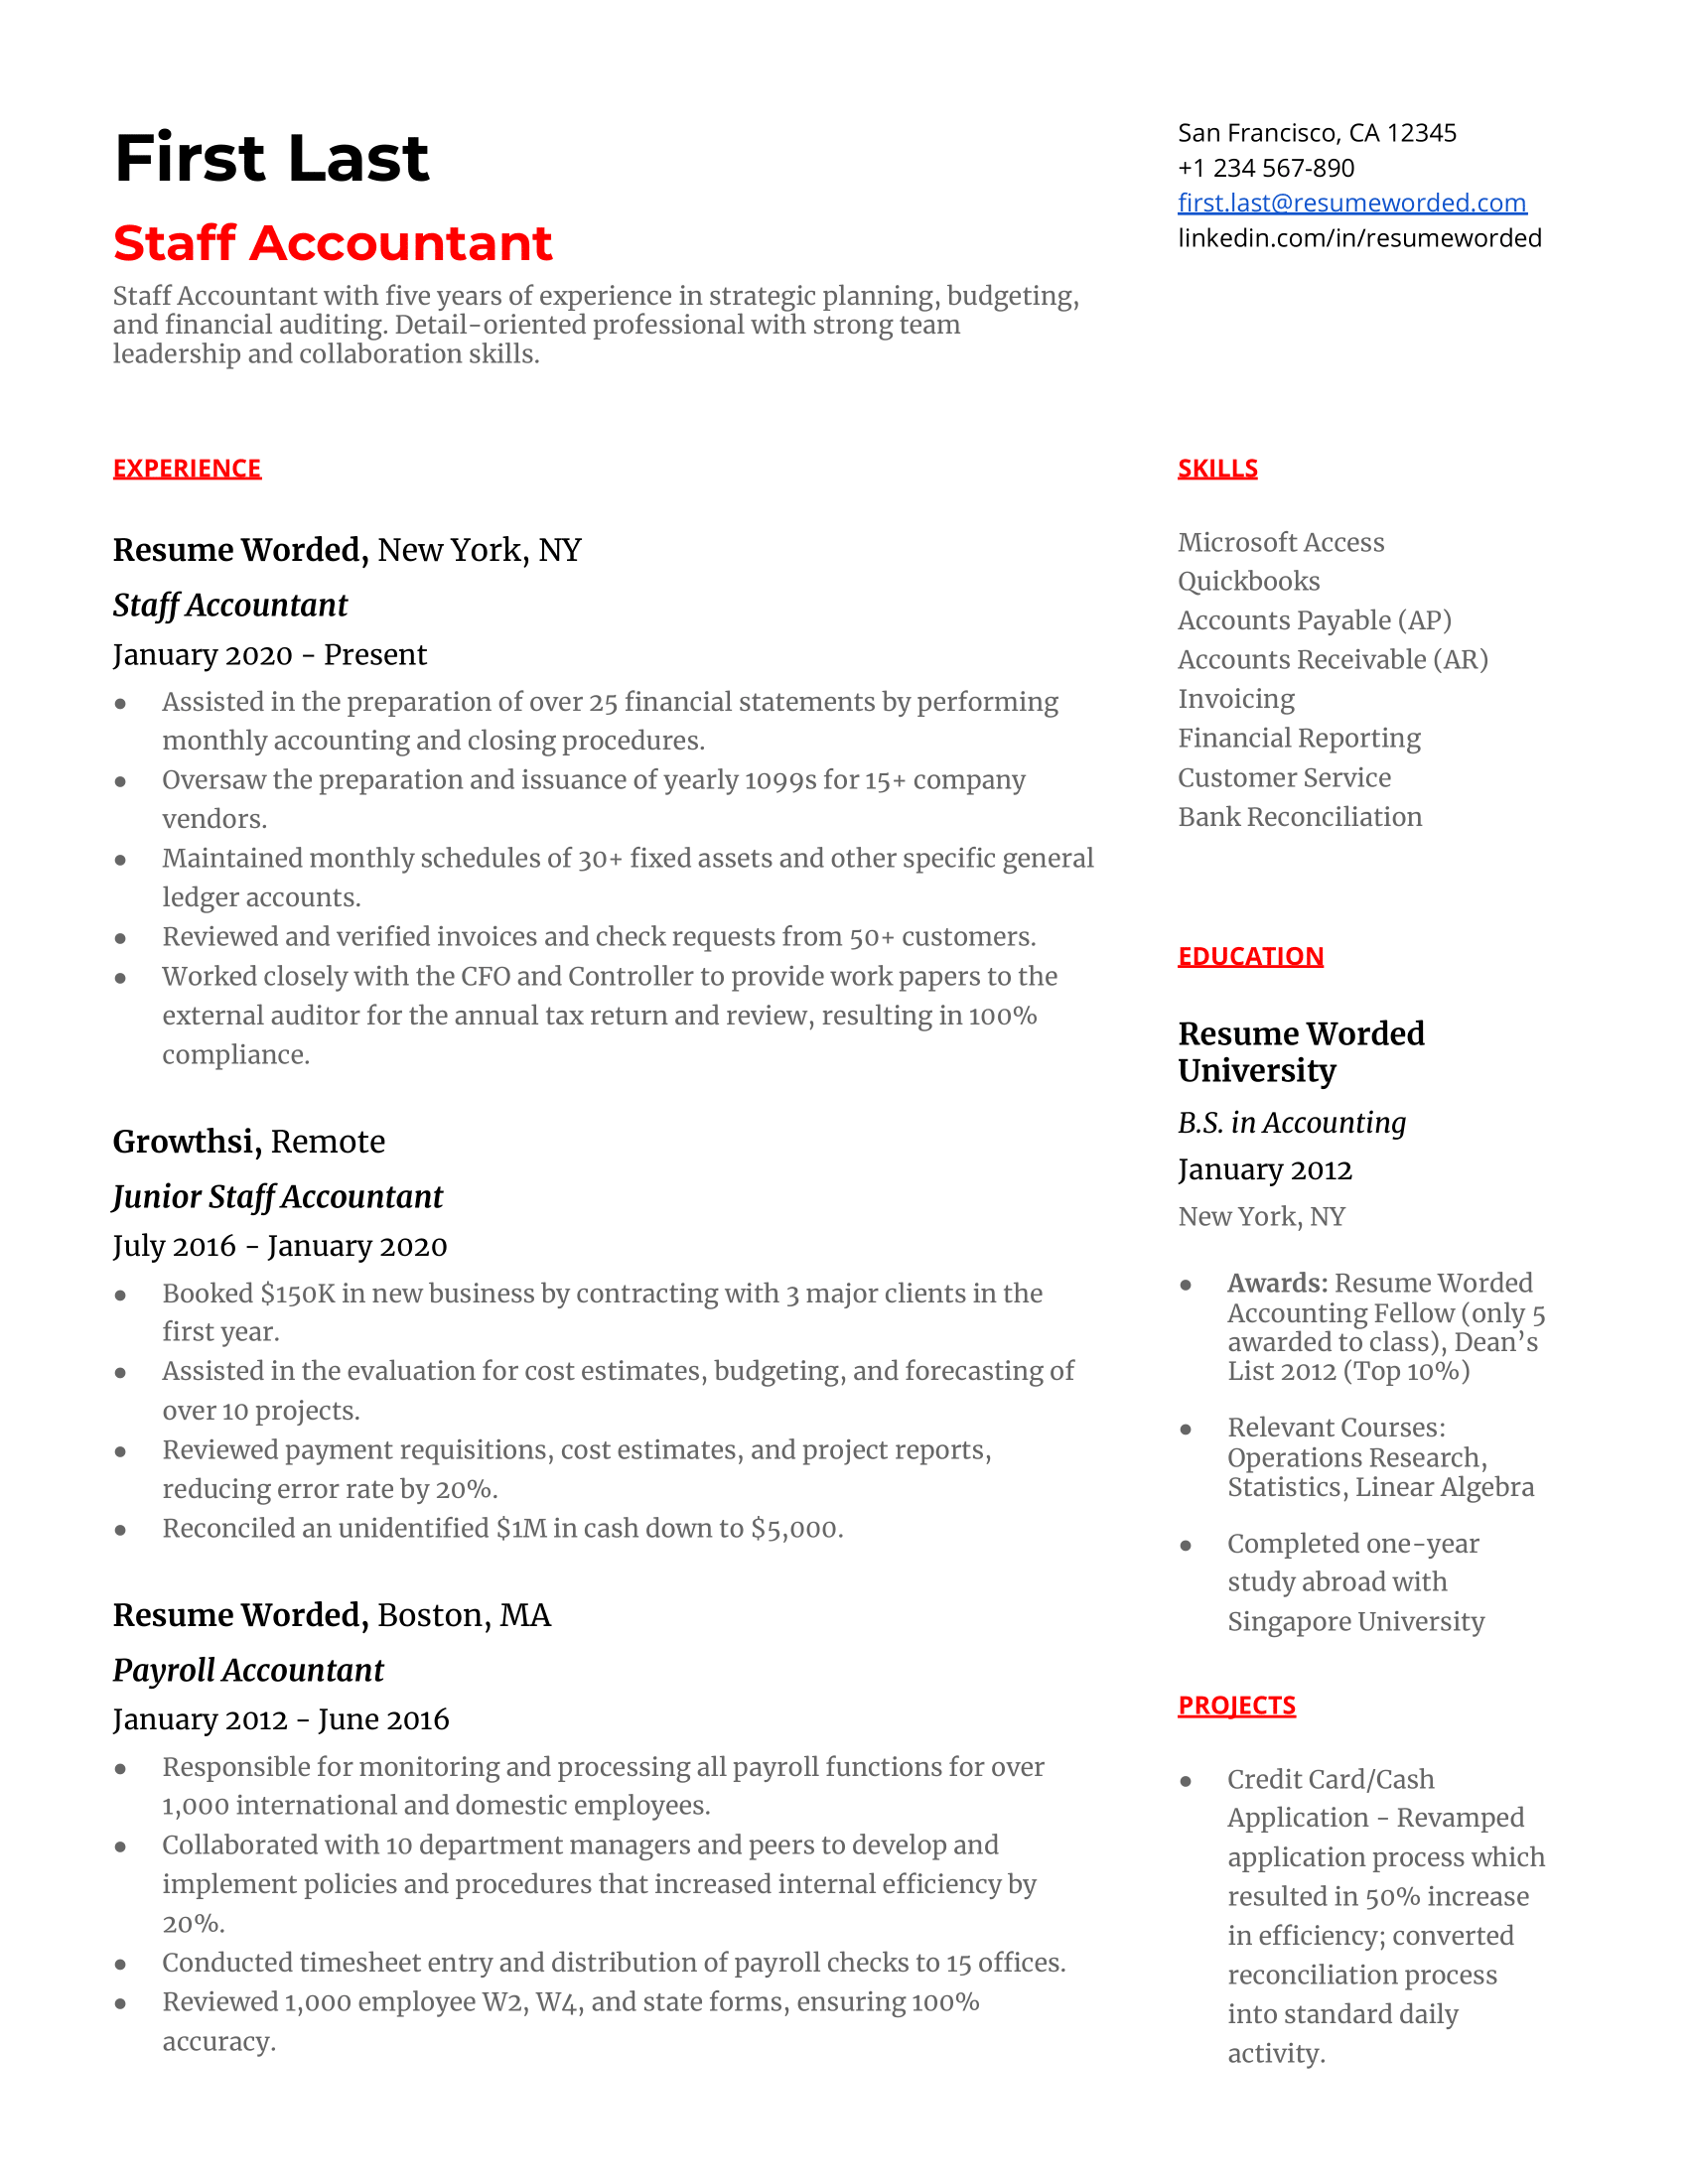 Staff Accountant Resume Template + Example